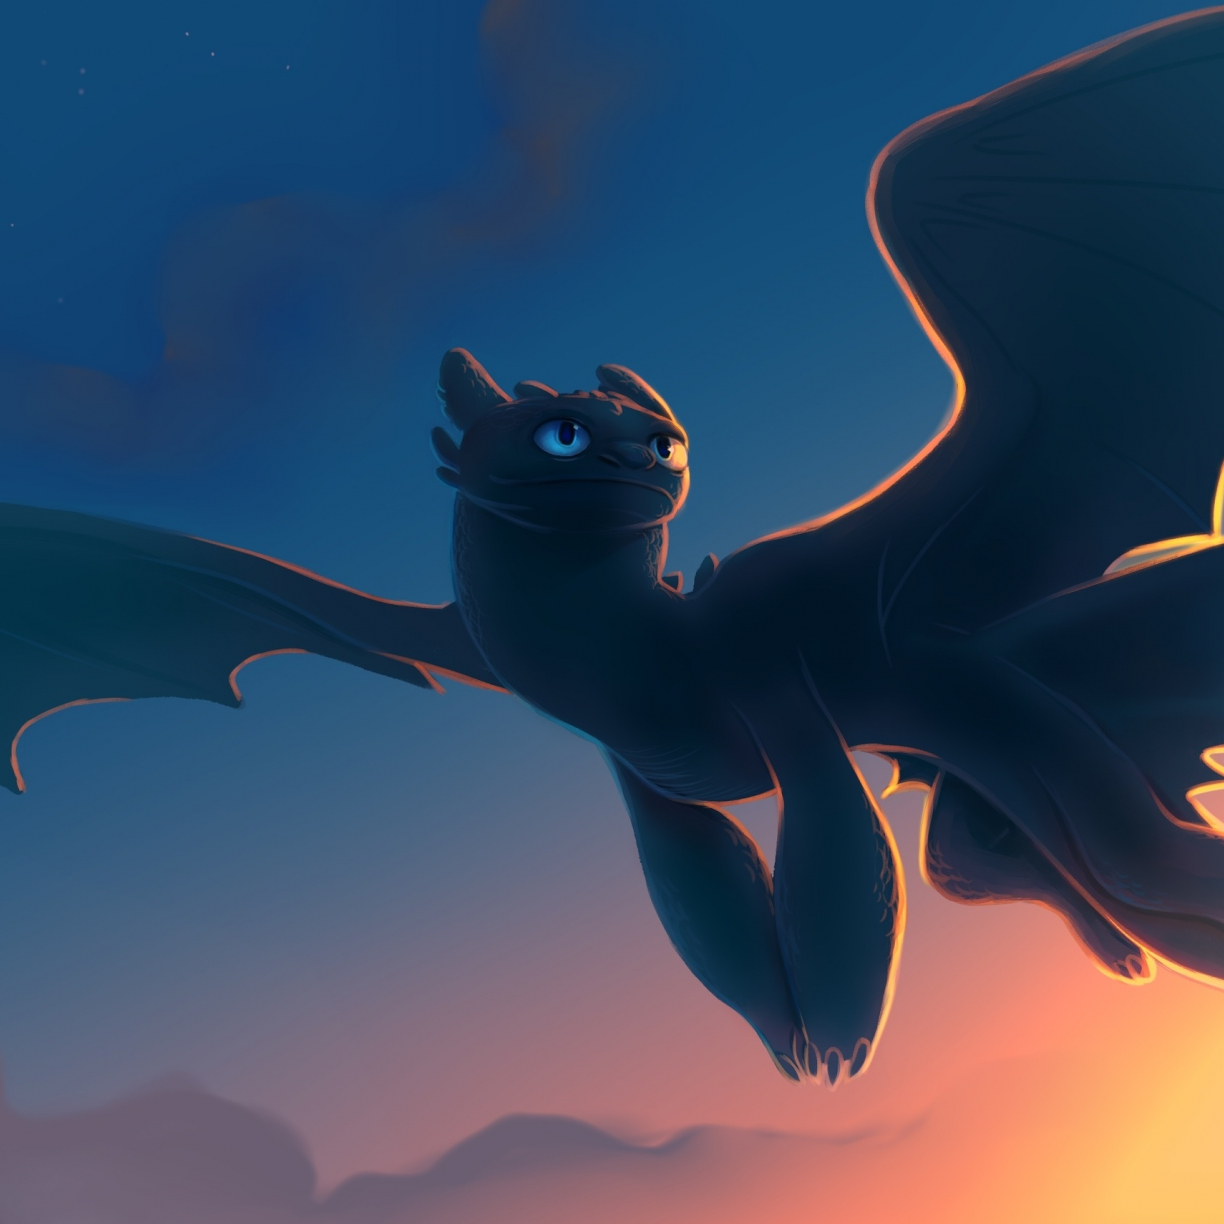 Desktop Wallpaper Toothless Movie How To Train Your Dragon